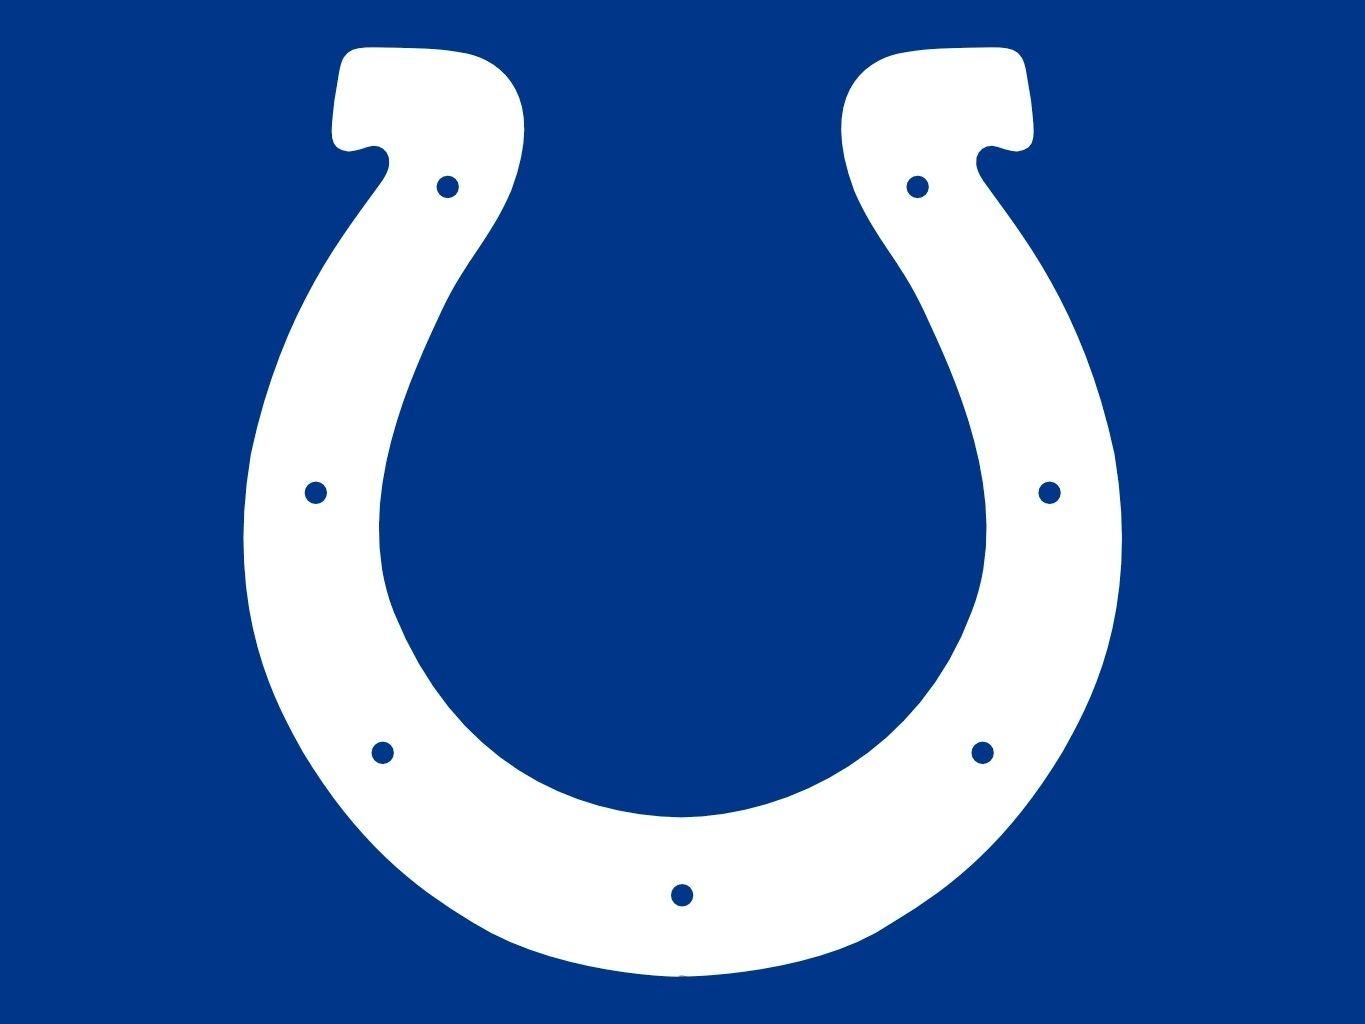 NFL Colts Logo - Indianapolis Colts Logo, Colts Symbol Meaning, History and Evolution